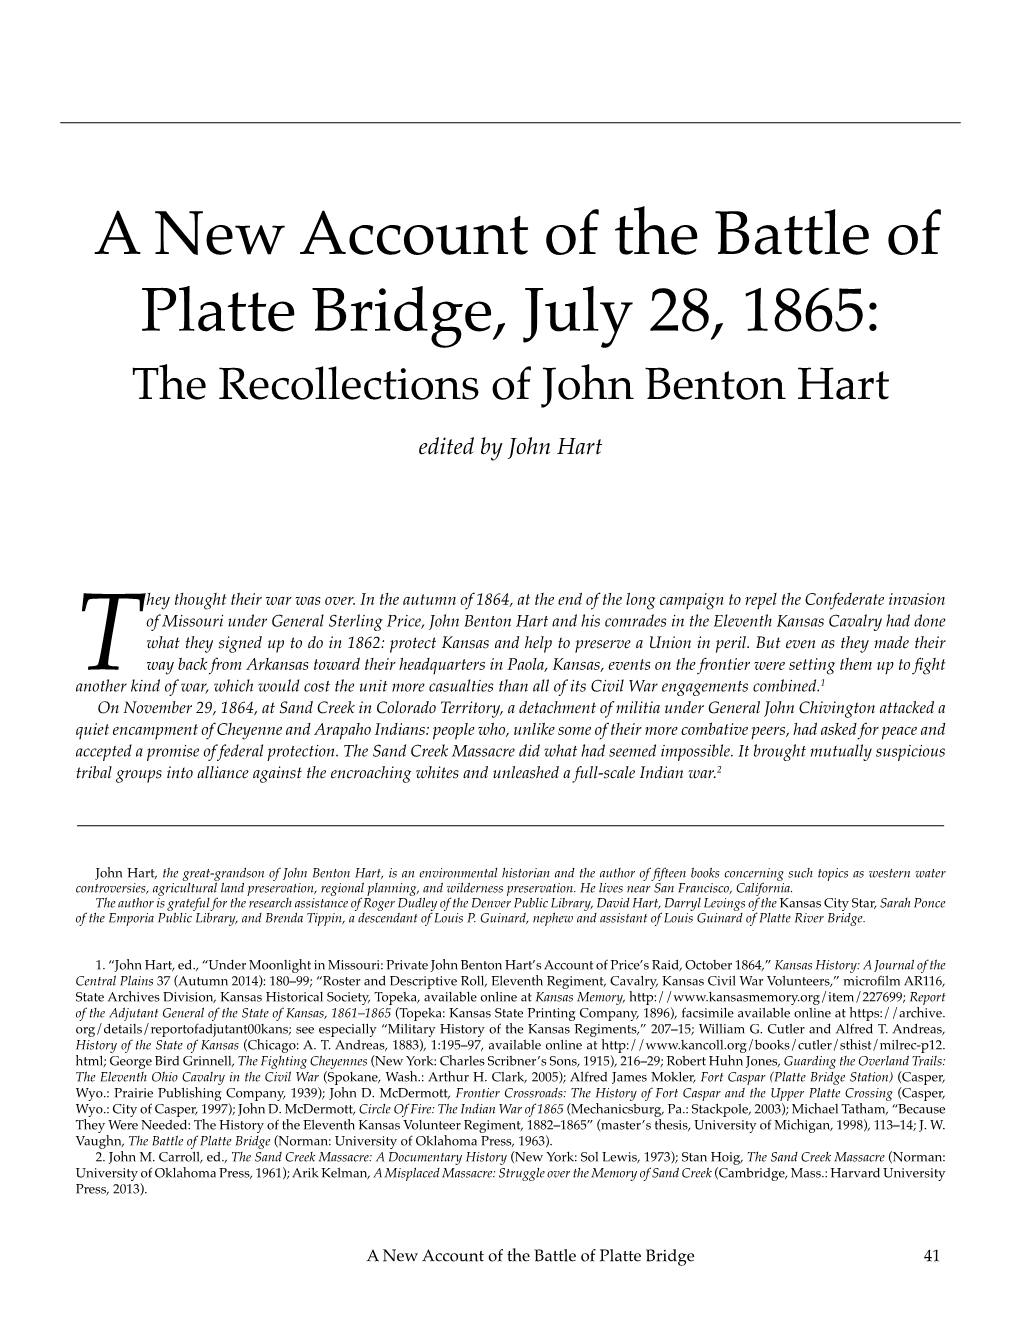 A New Account of the Battle of Platte Bridge, July 28, 1865: the Recollections of John Benton Hart Edited by John Hart